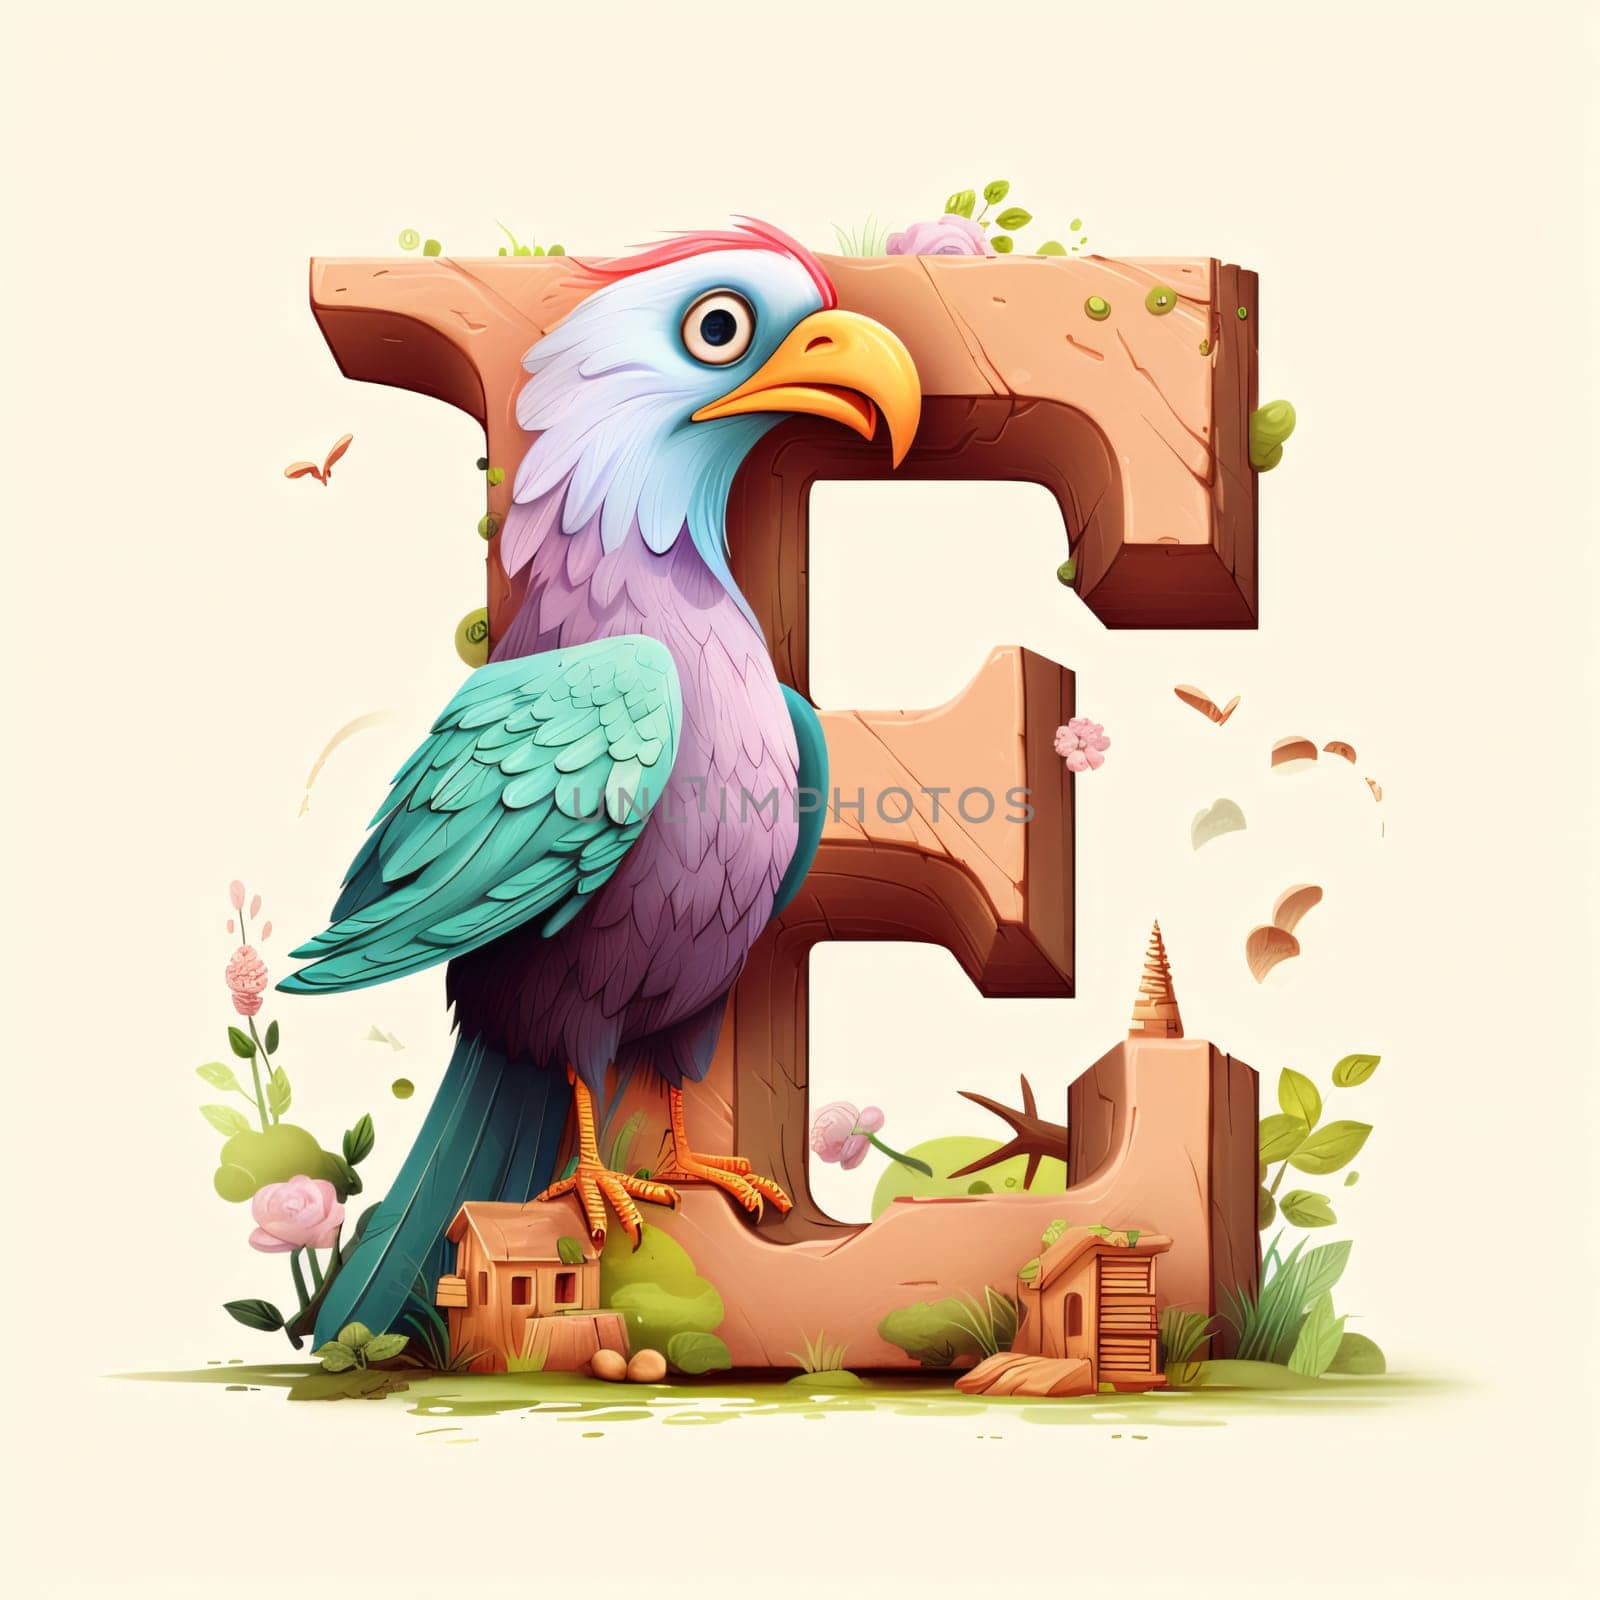 Graphic alphabet letters: Alphabet letter E with cute cartoon parrot on nature background illustration